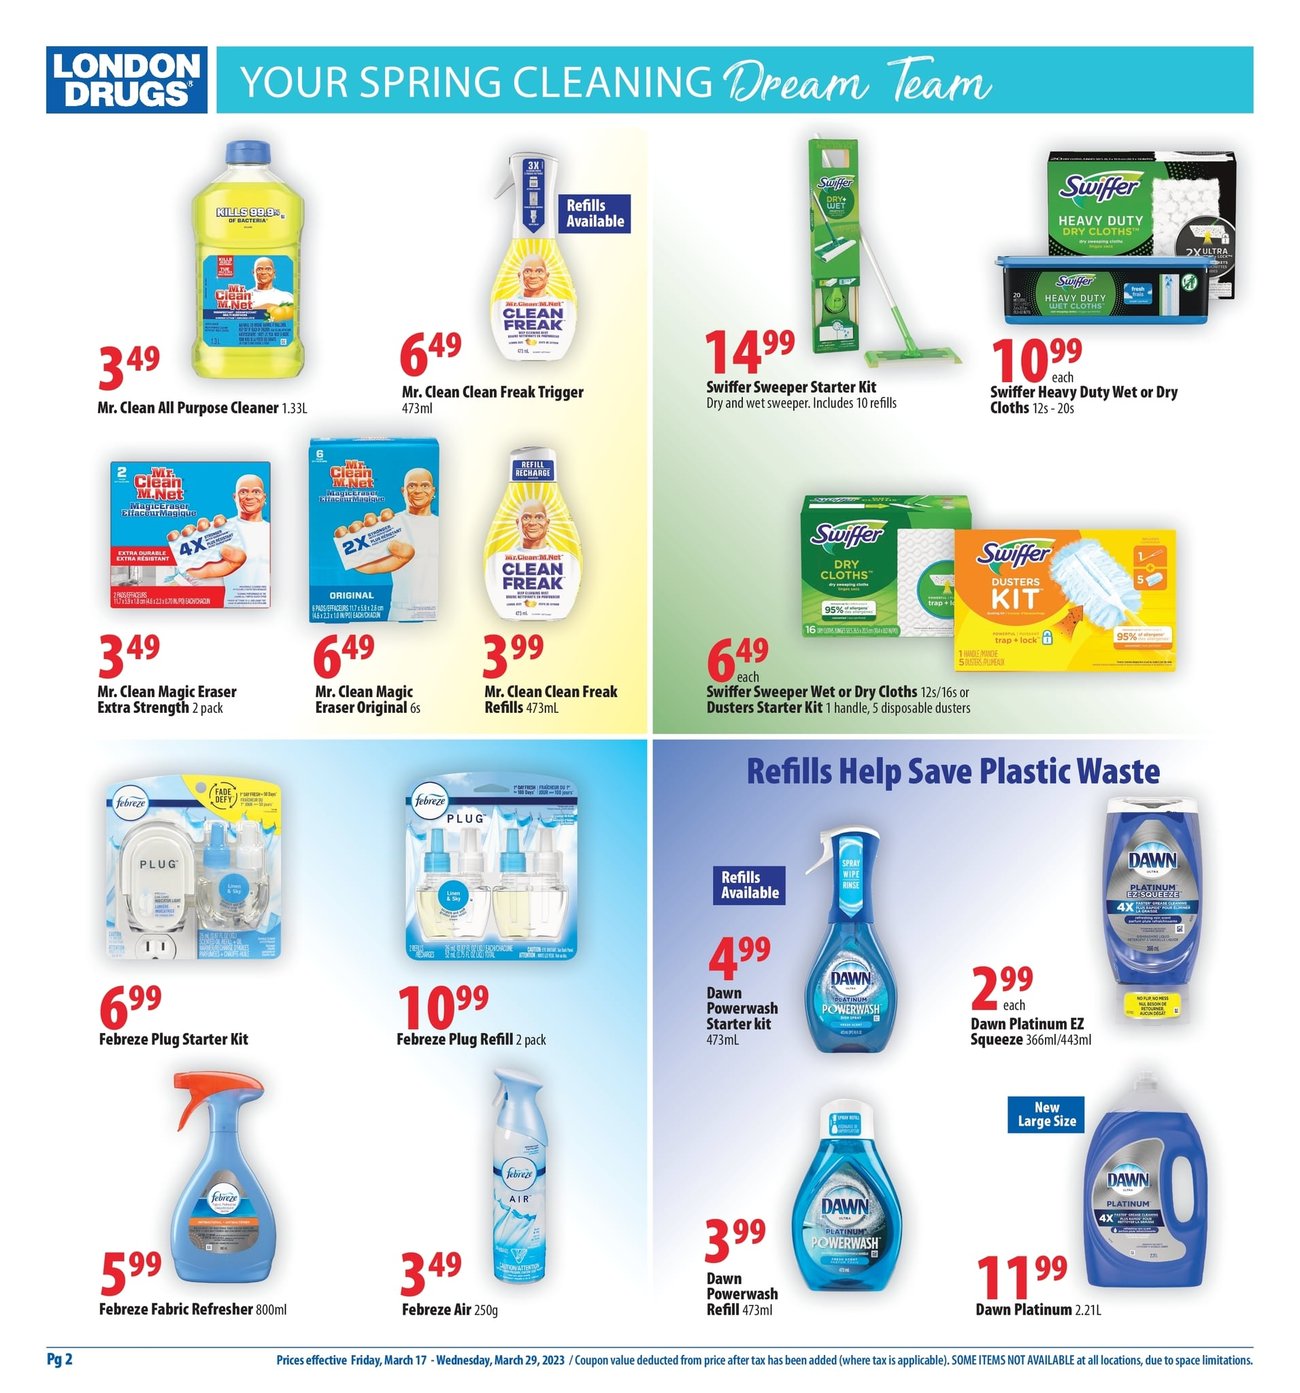 London Drugs - Household Savings Event - Page 2